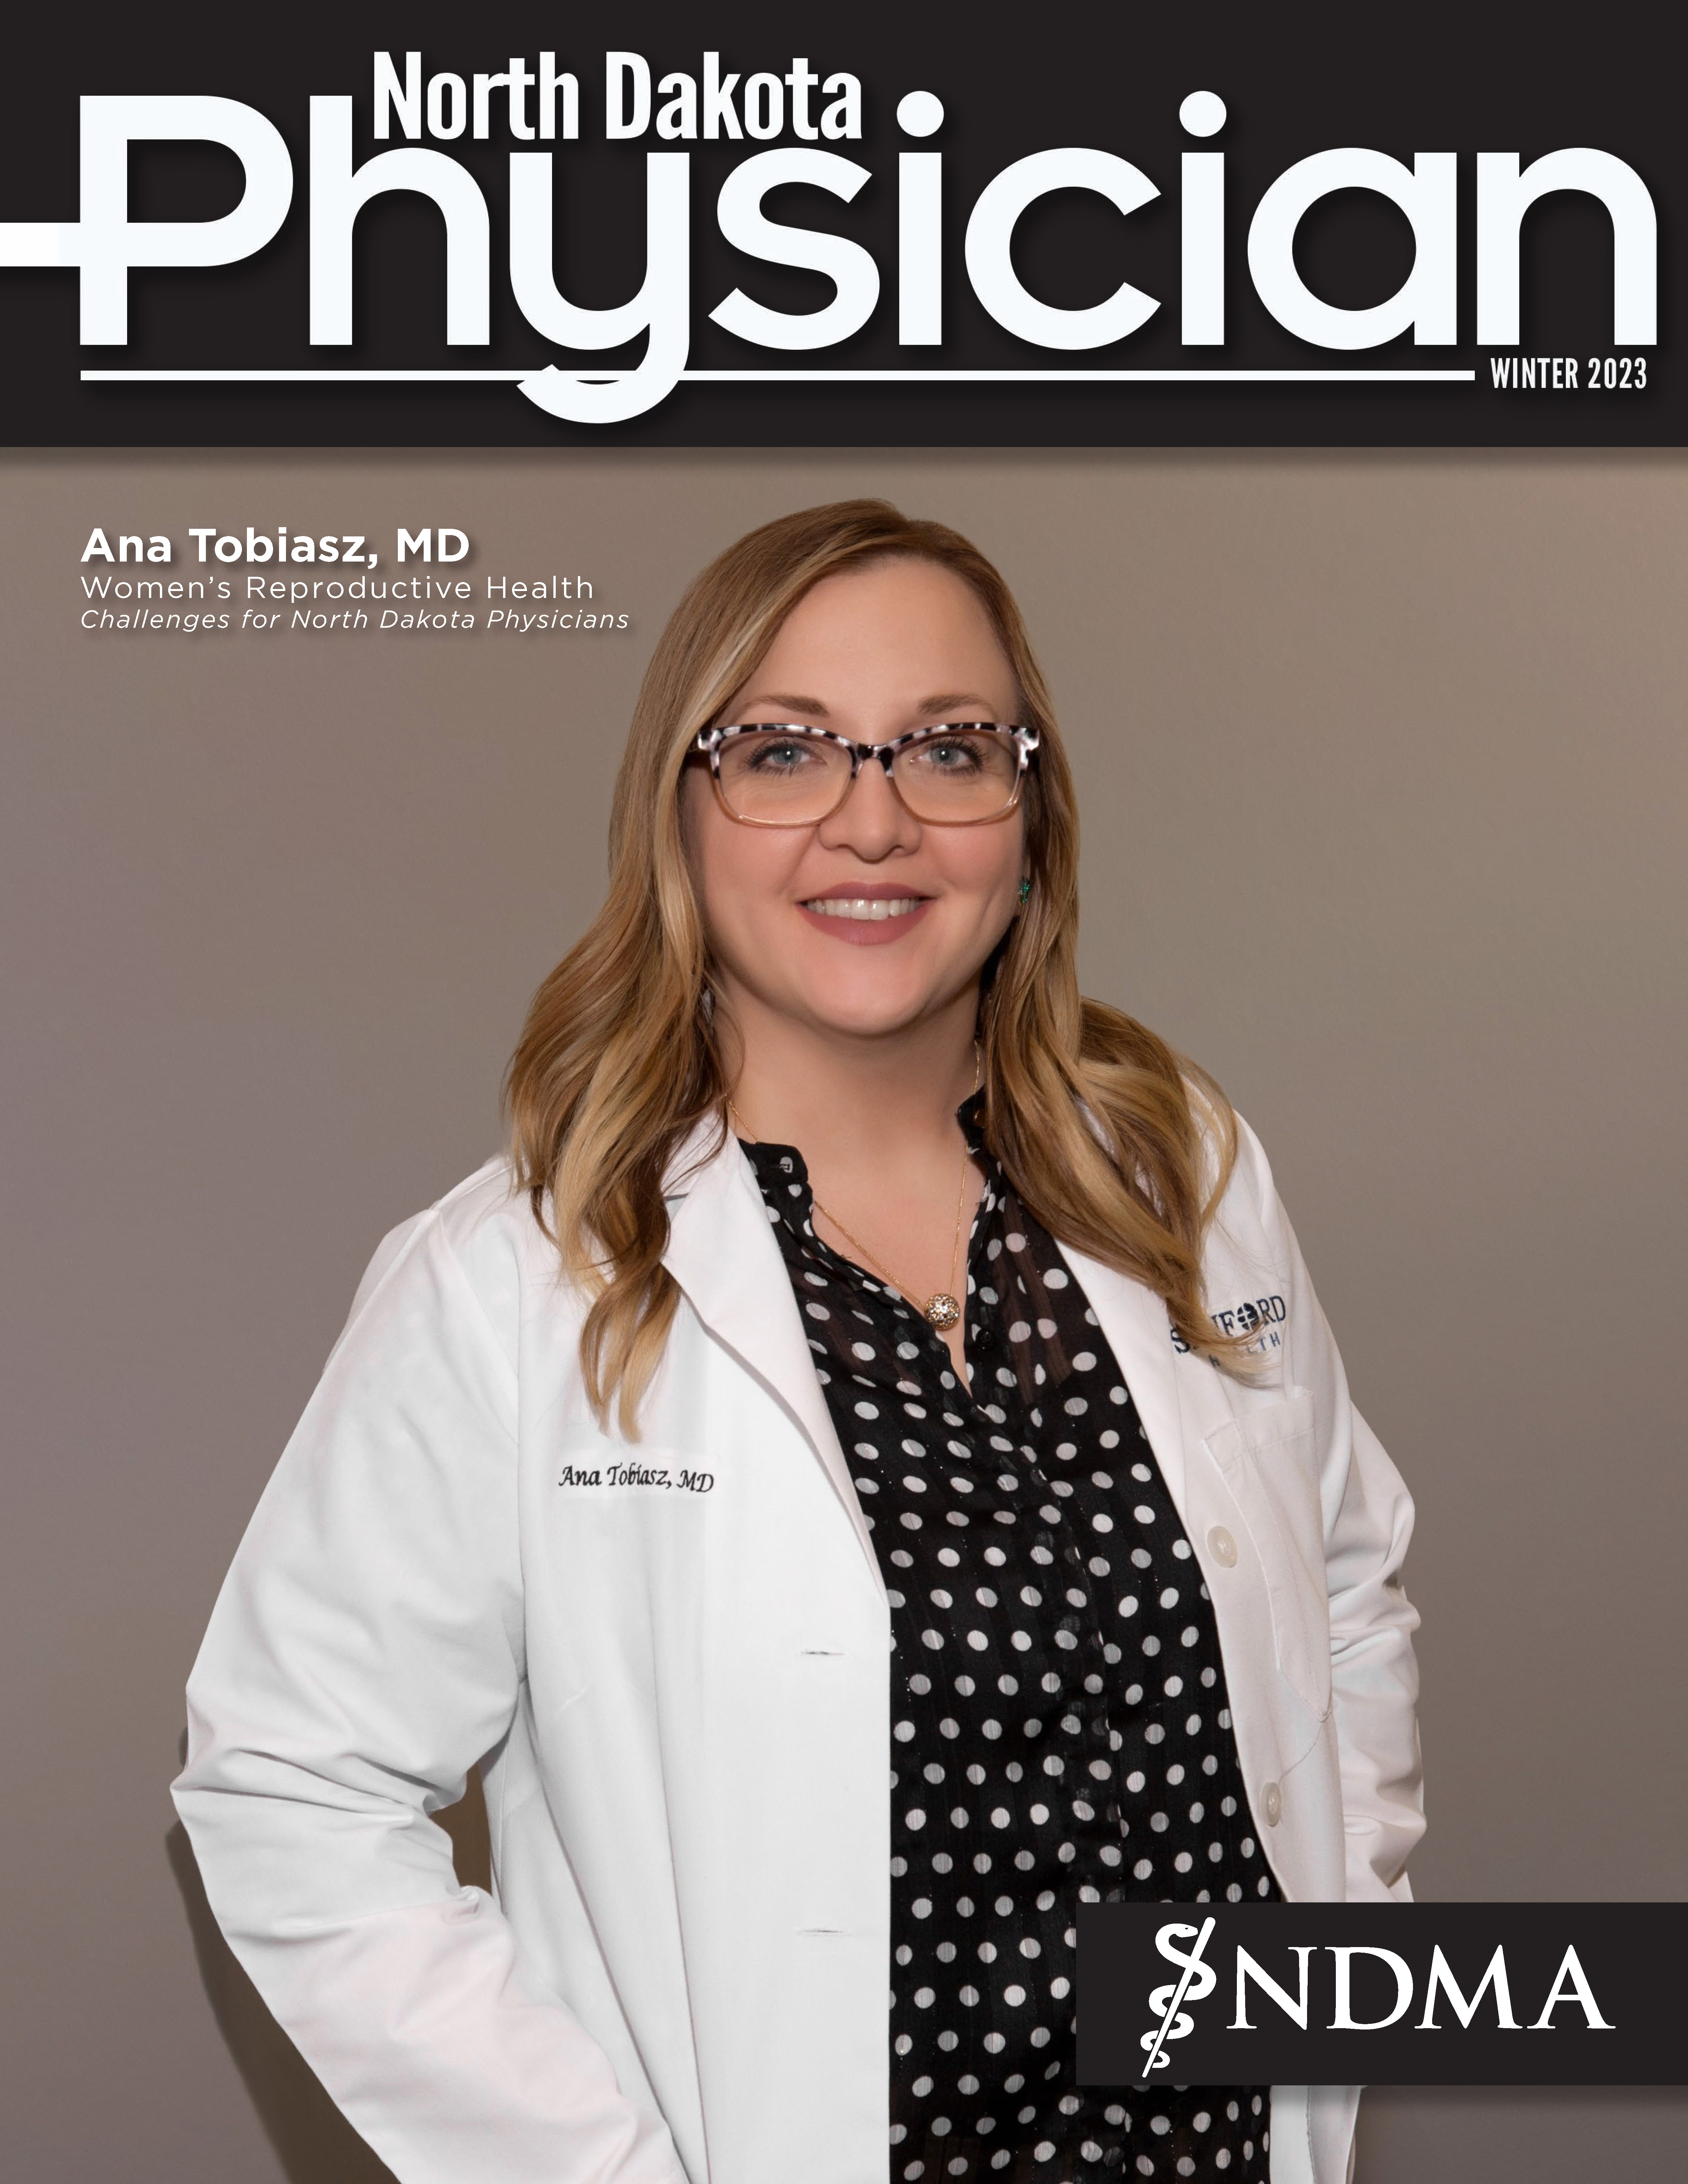 ND Physician Winter 2023 magazine cover